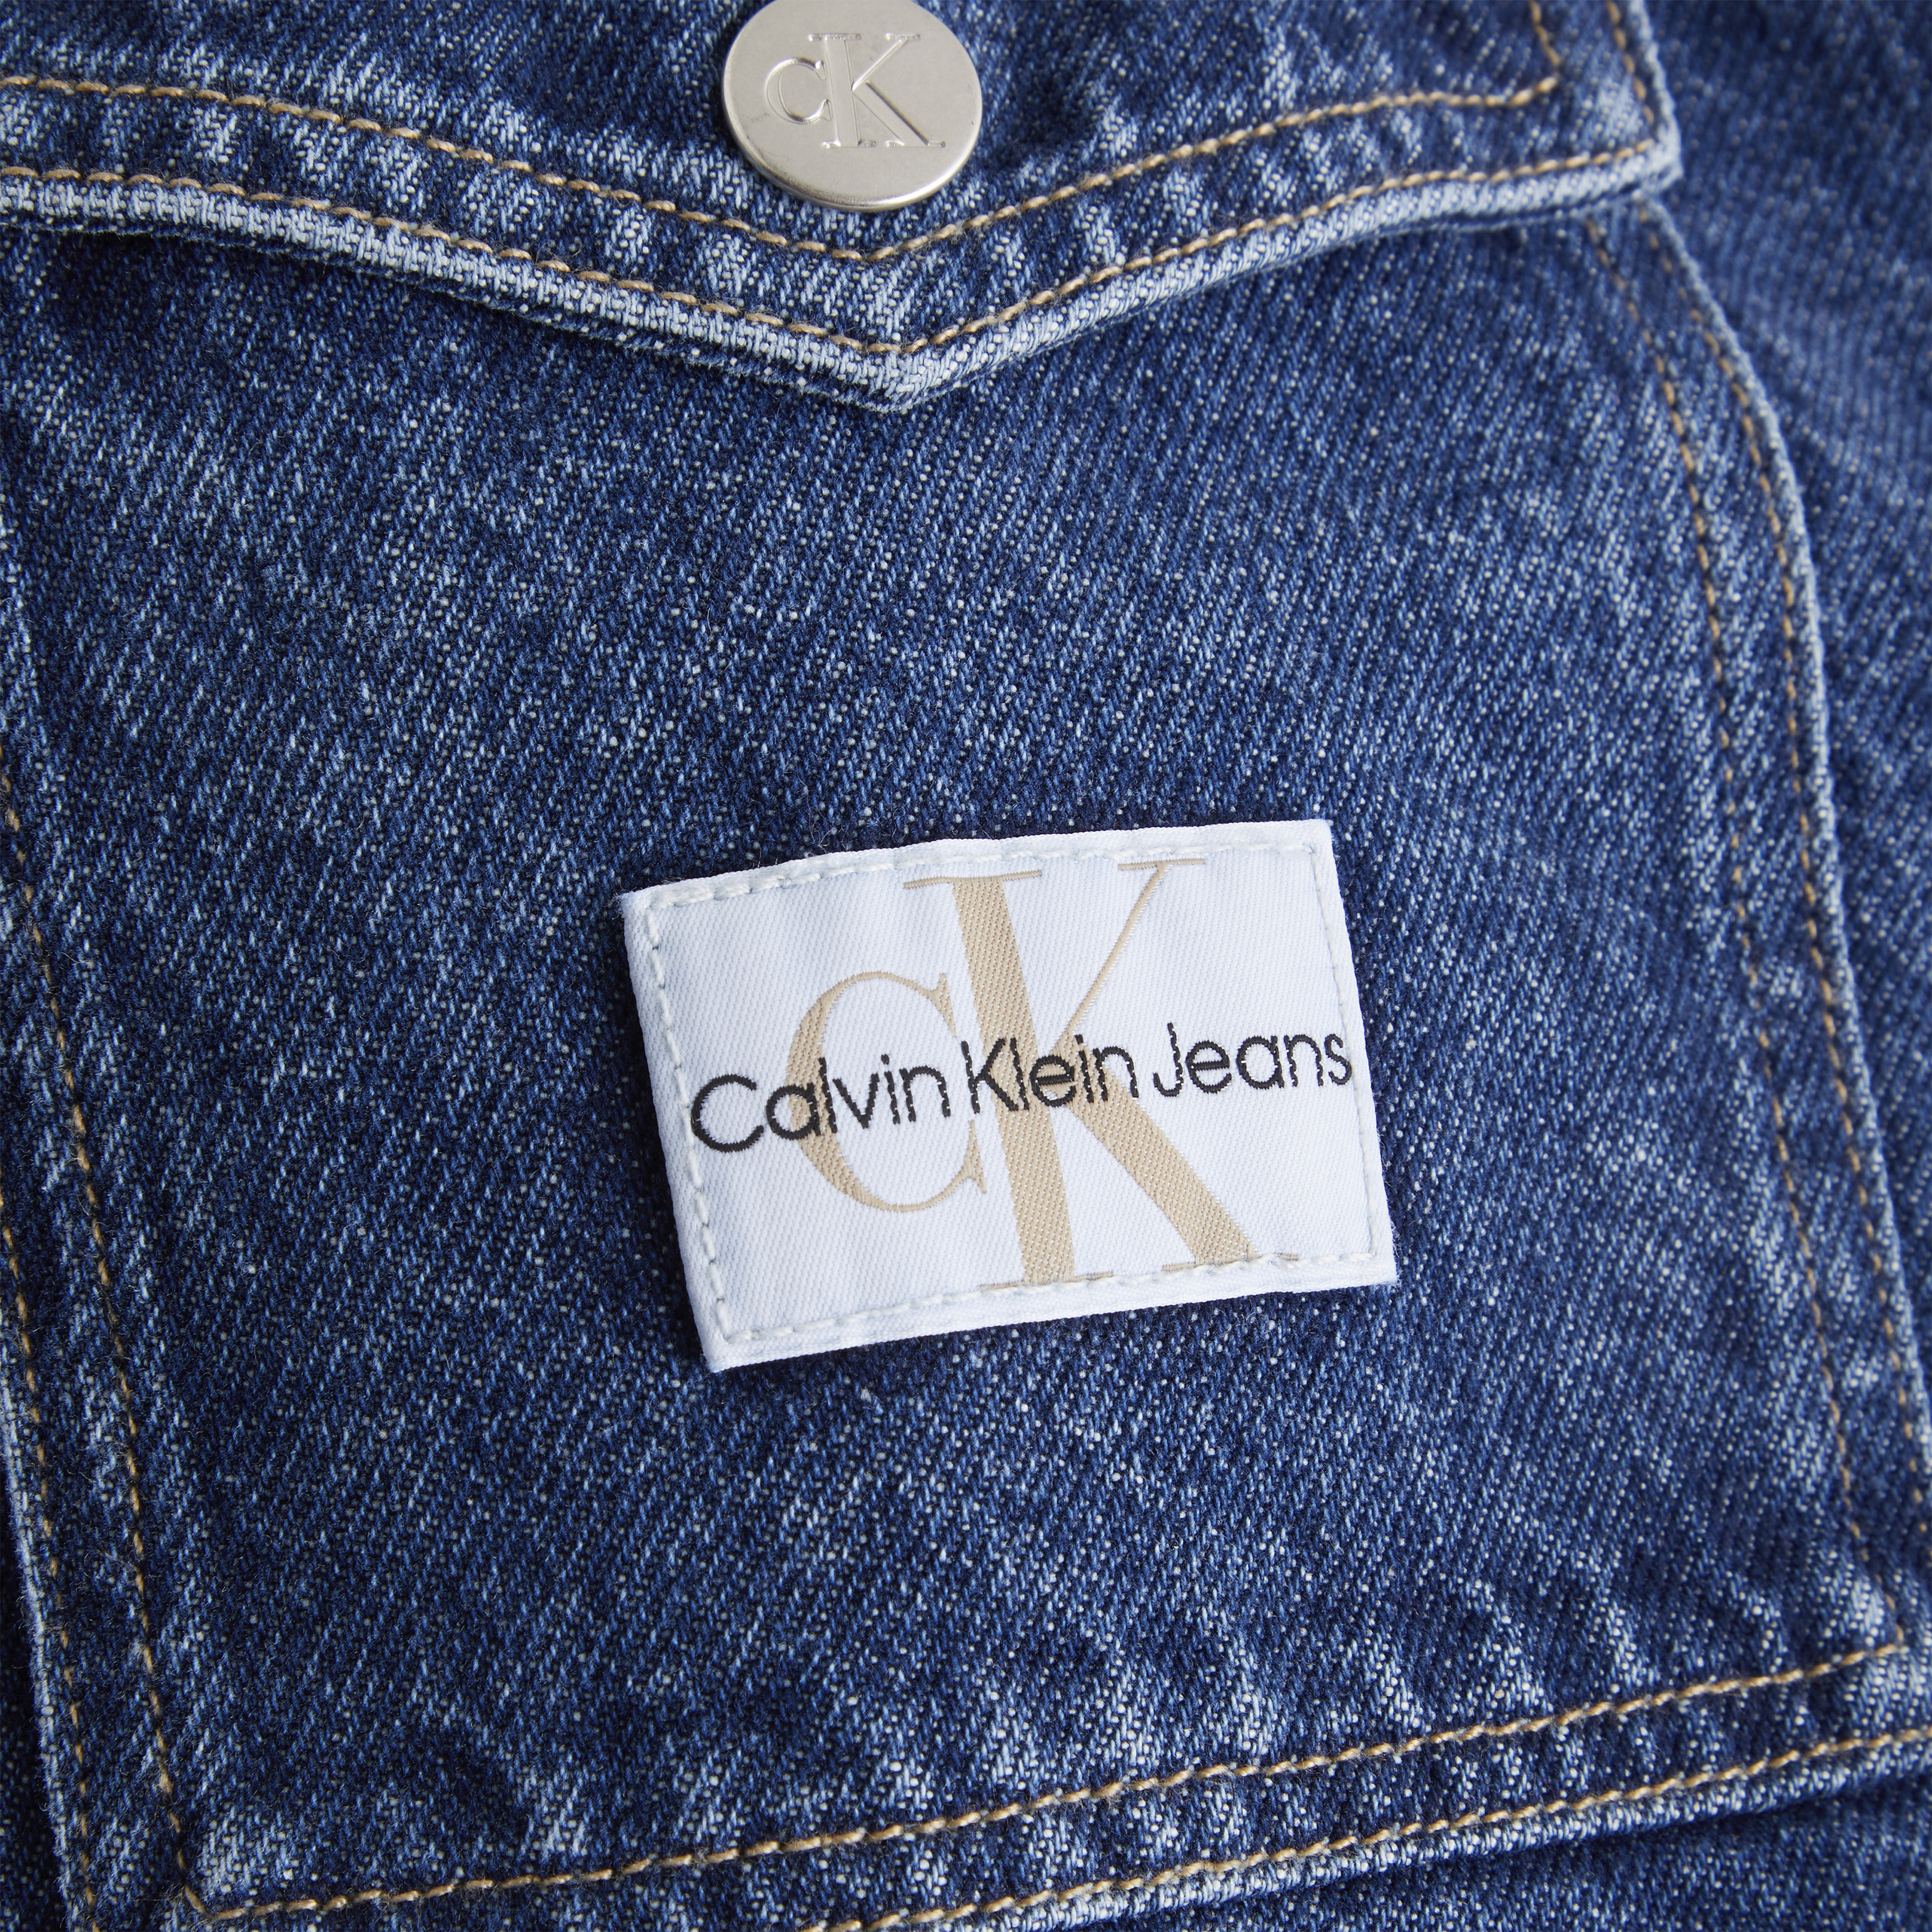 Calvin Klein Jeans - Giacca relaxed fit corta in denim, Denim, large image number 2